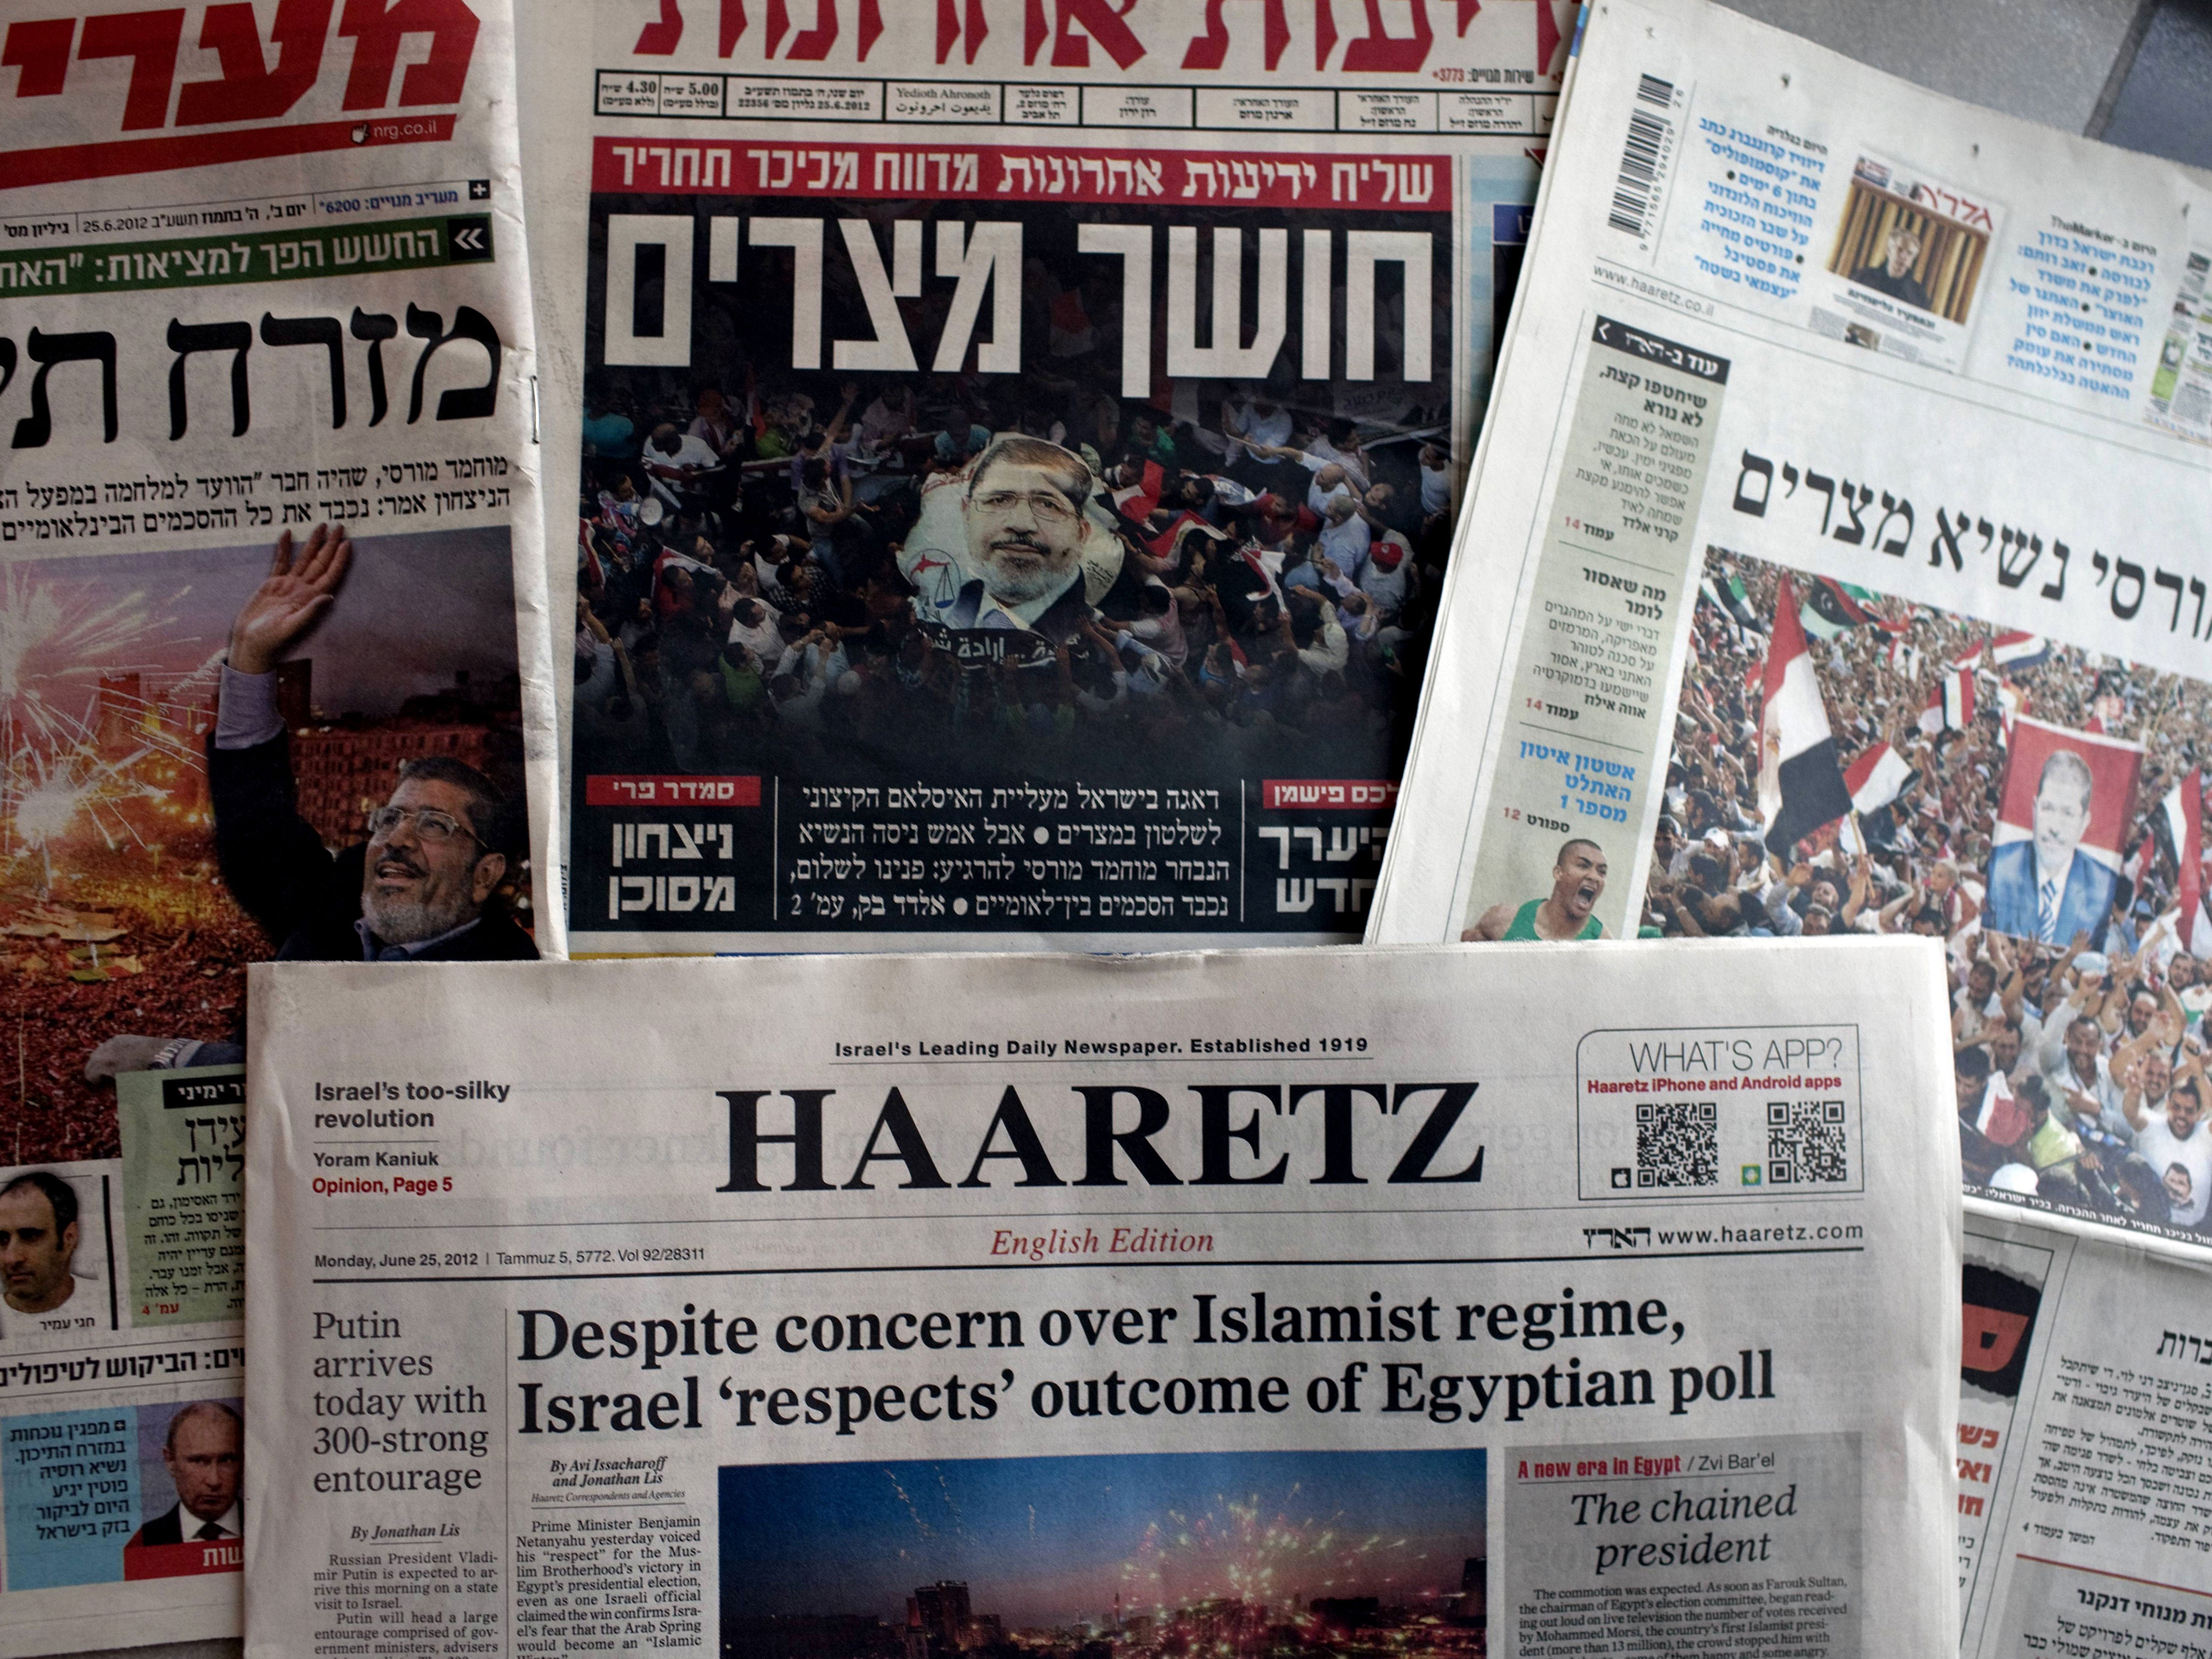 Some Israeli news outlets expressed interest in using the image